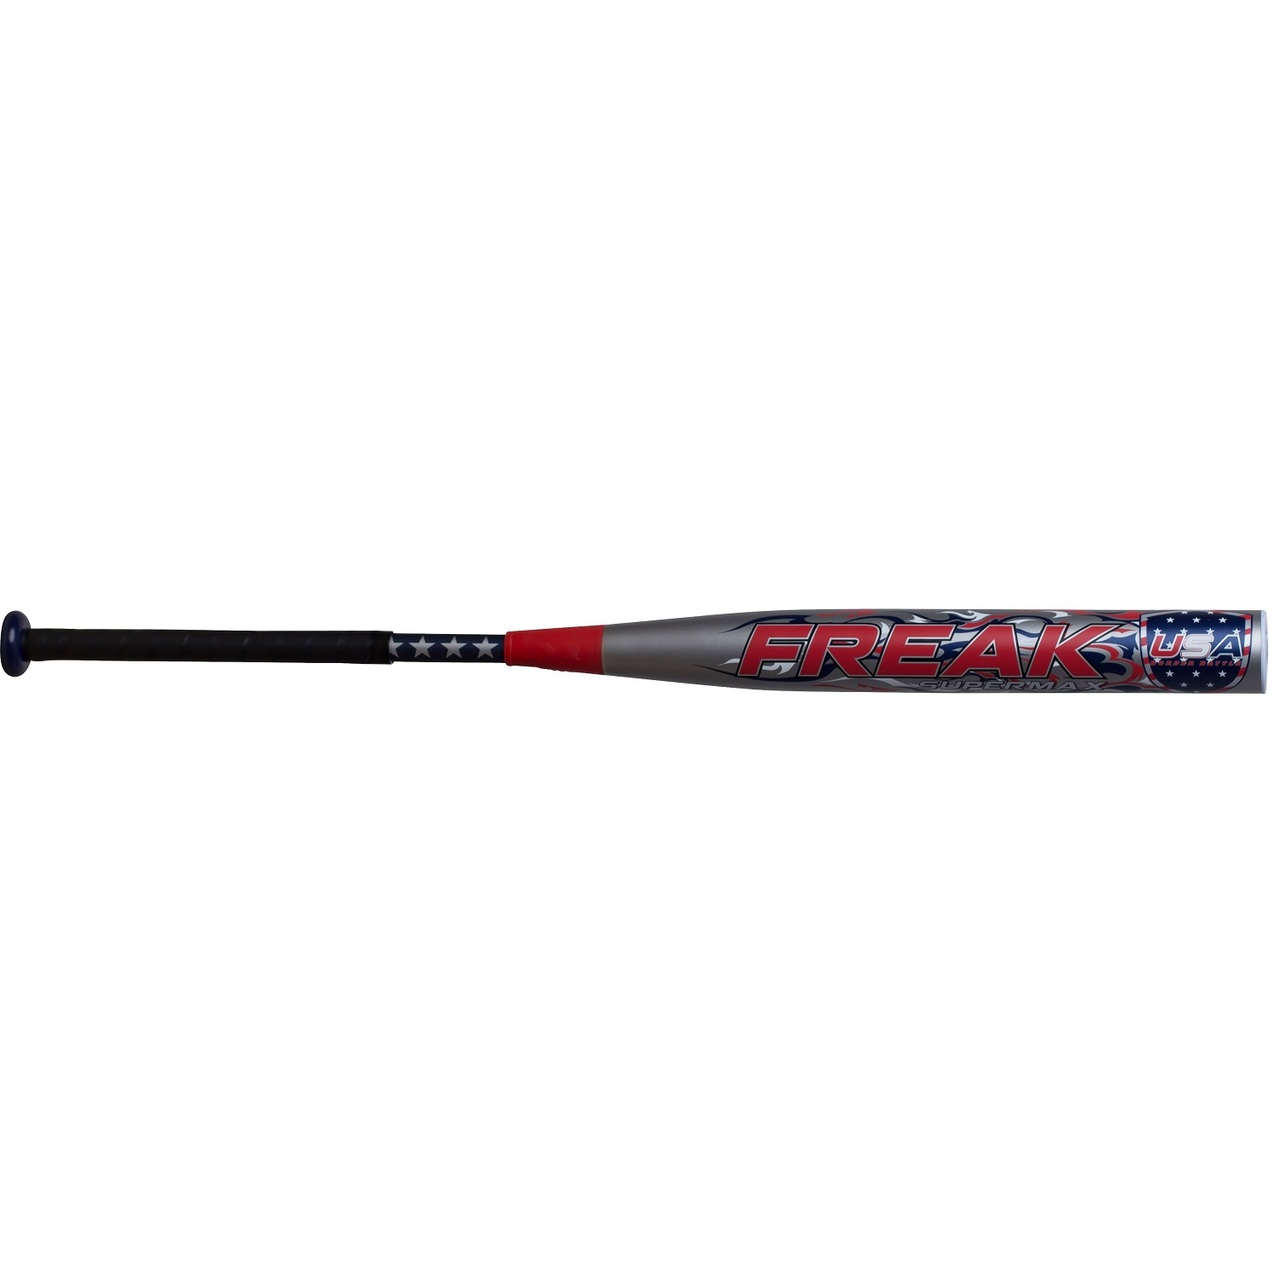 miken-freak-usa-supermax-asa-mbbf4a-slowpitch-softball-bat-34-inch-26-oz MBBF4A-3-26 Miken 658925039461 Numbered Limited Edition - Only 1000 made Four-Piece 100% Composite Construction